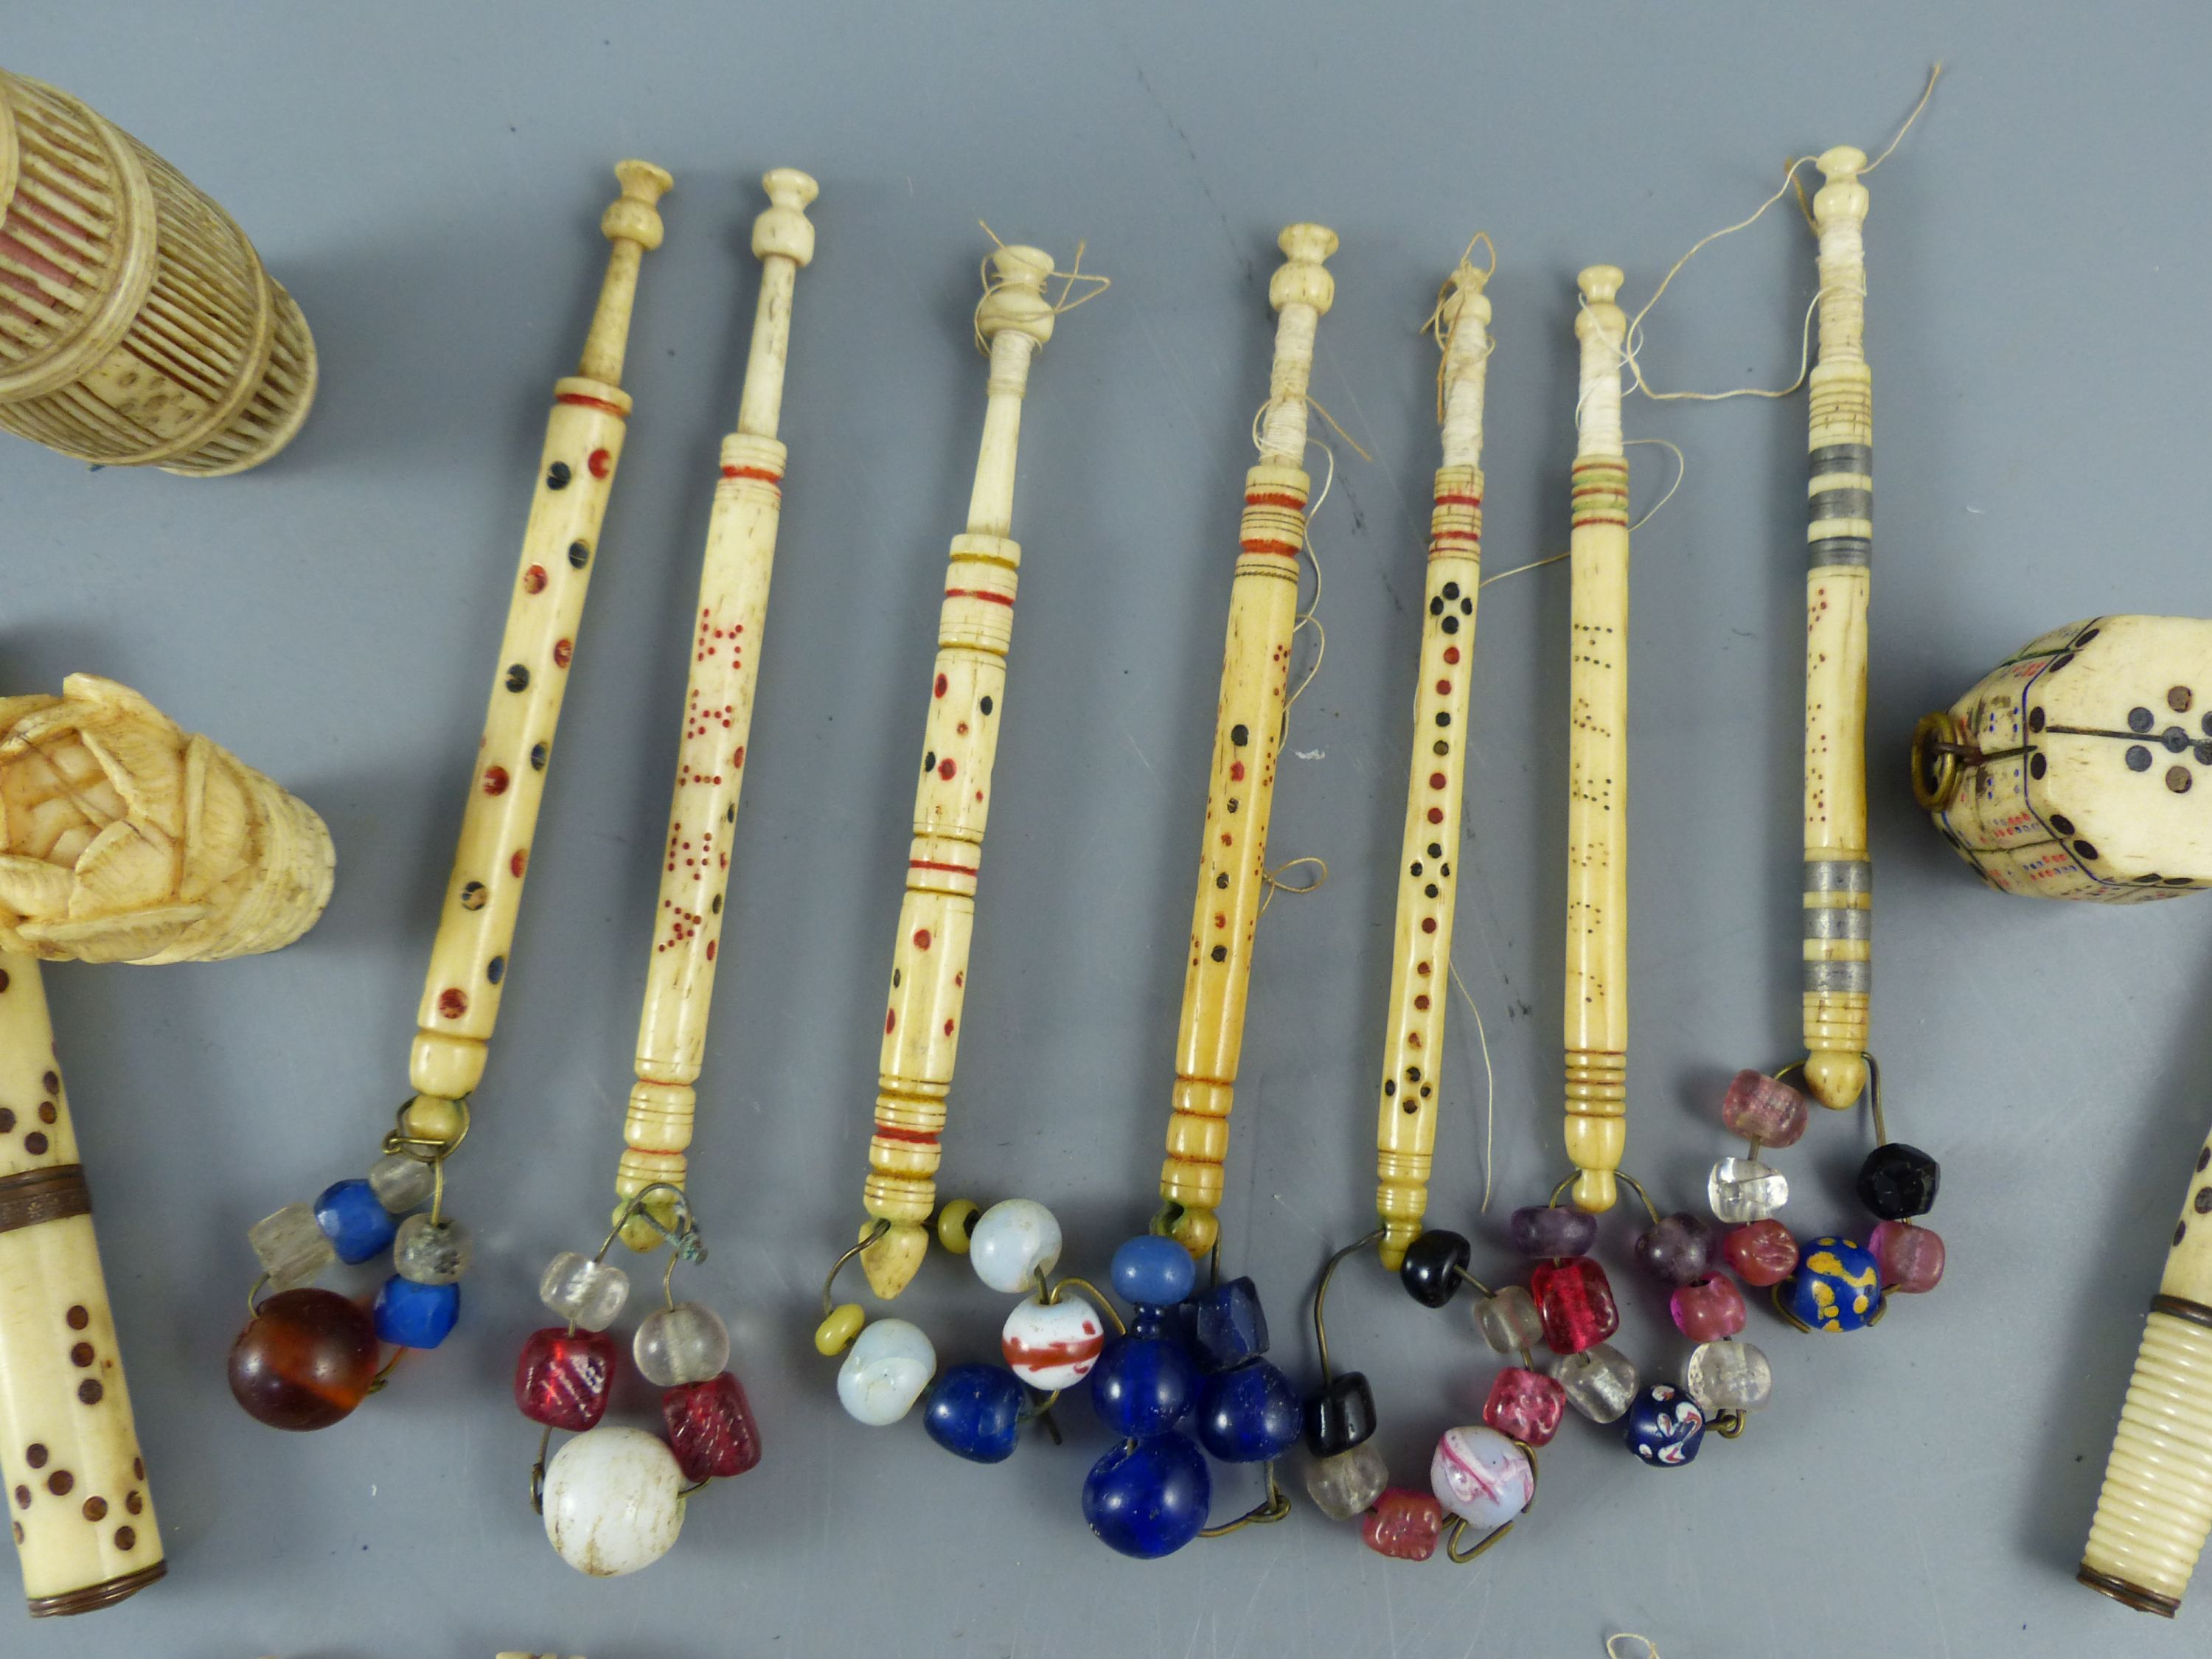 A collection of assorted 19th century stained ivory and bone sewing implements